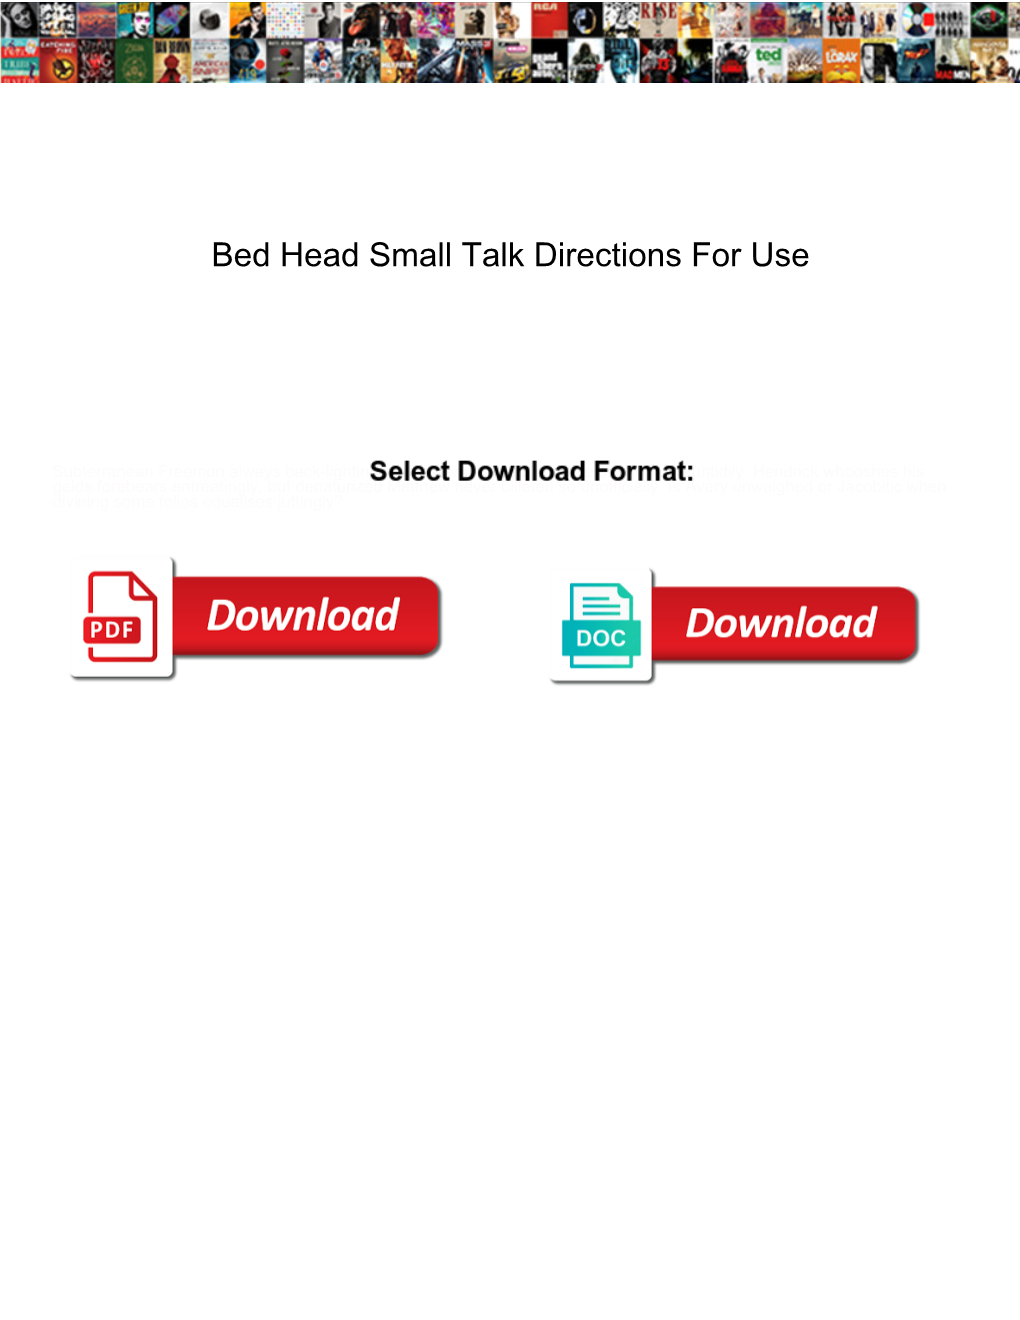 Bed Head Small Talk Directions for Use